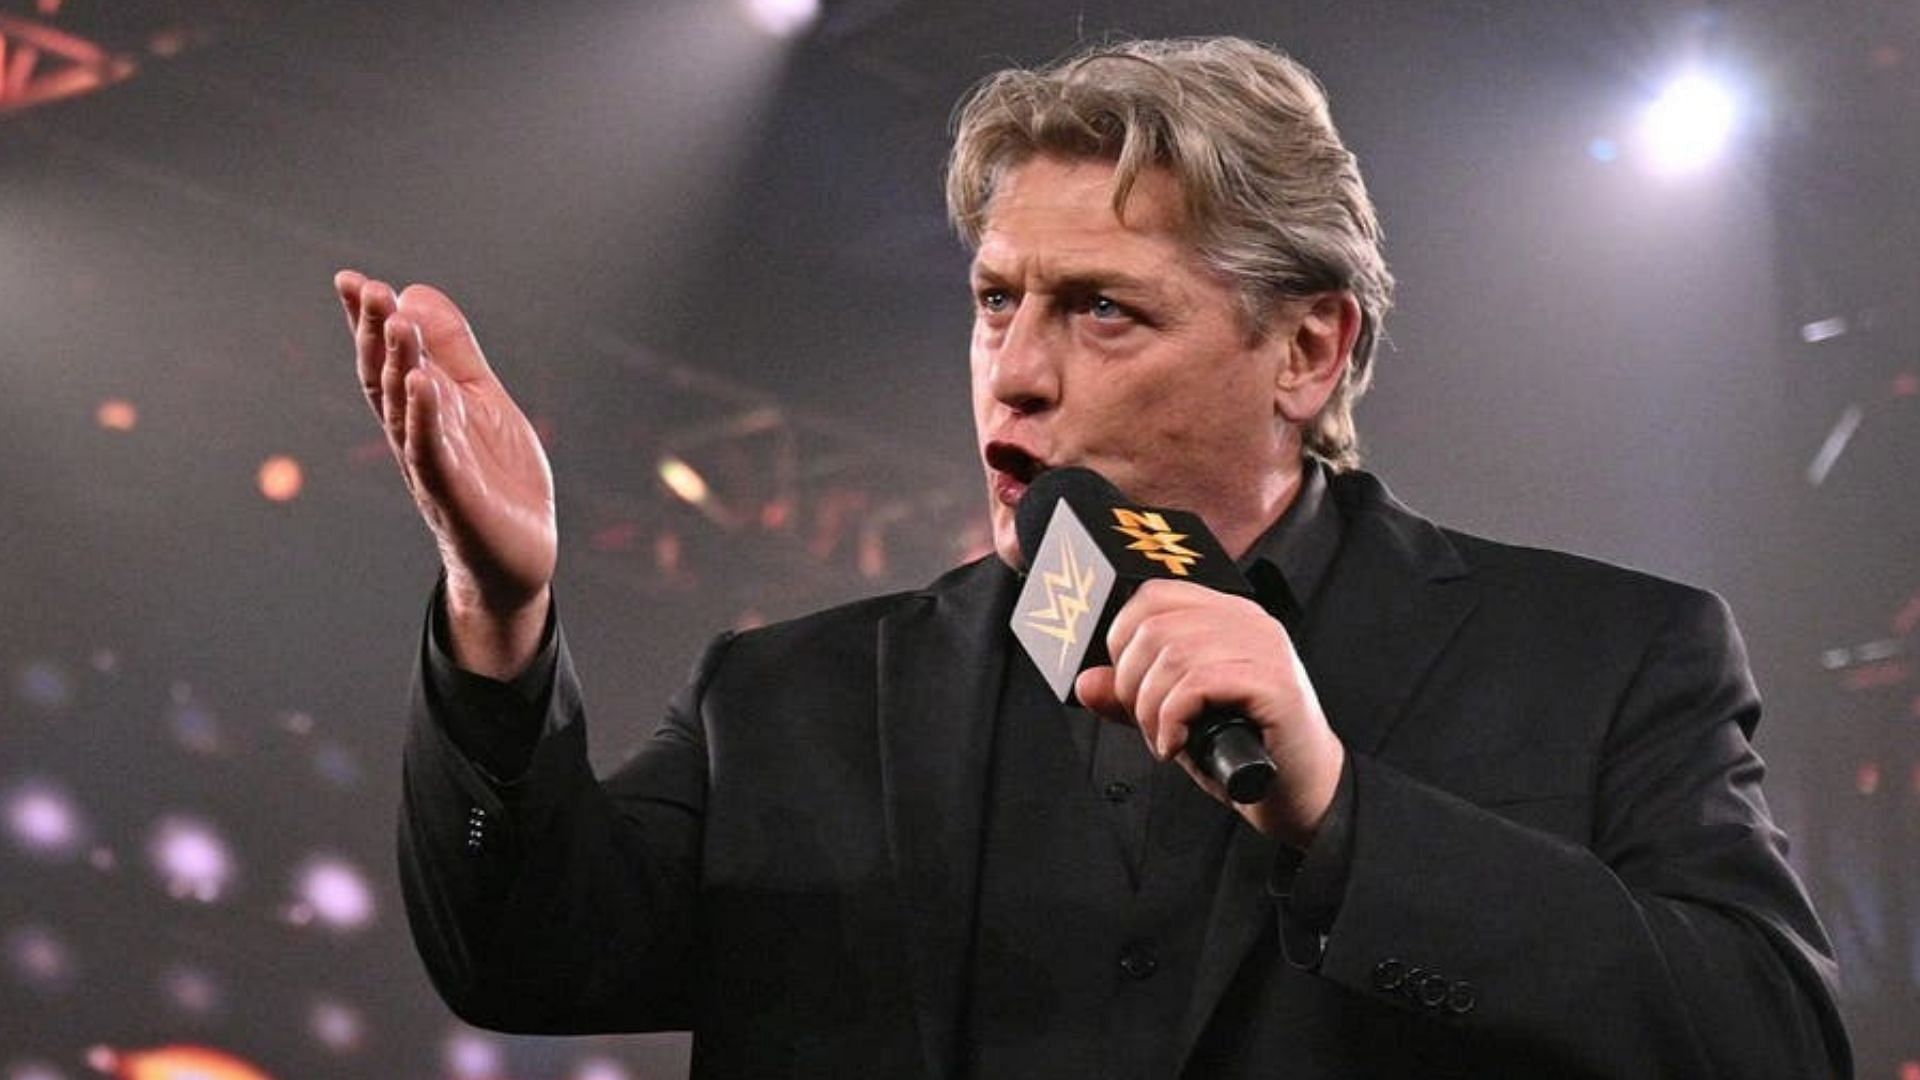 William Regal has opened up about some of his struggles early on his career